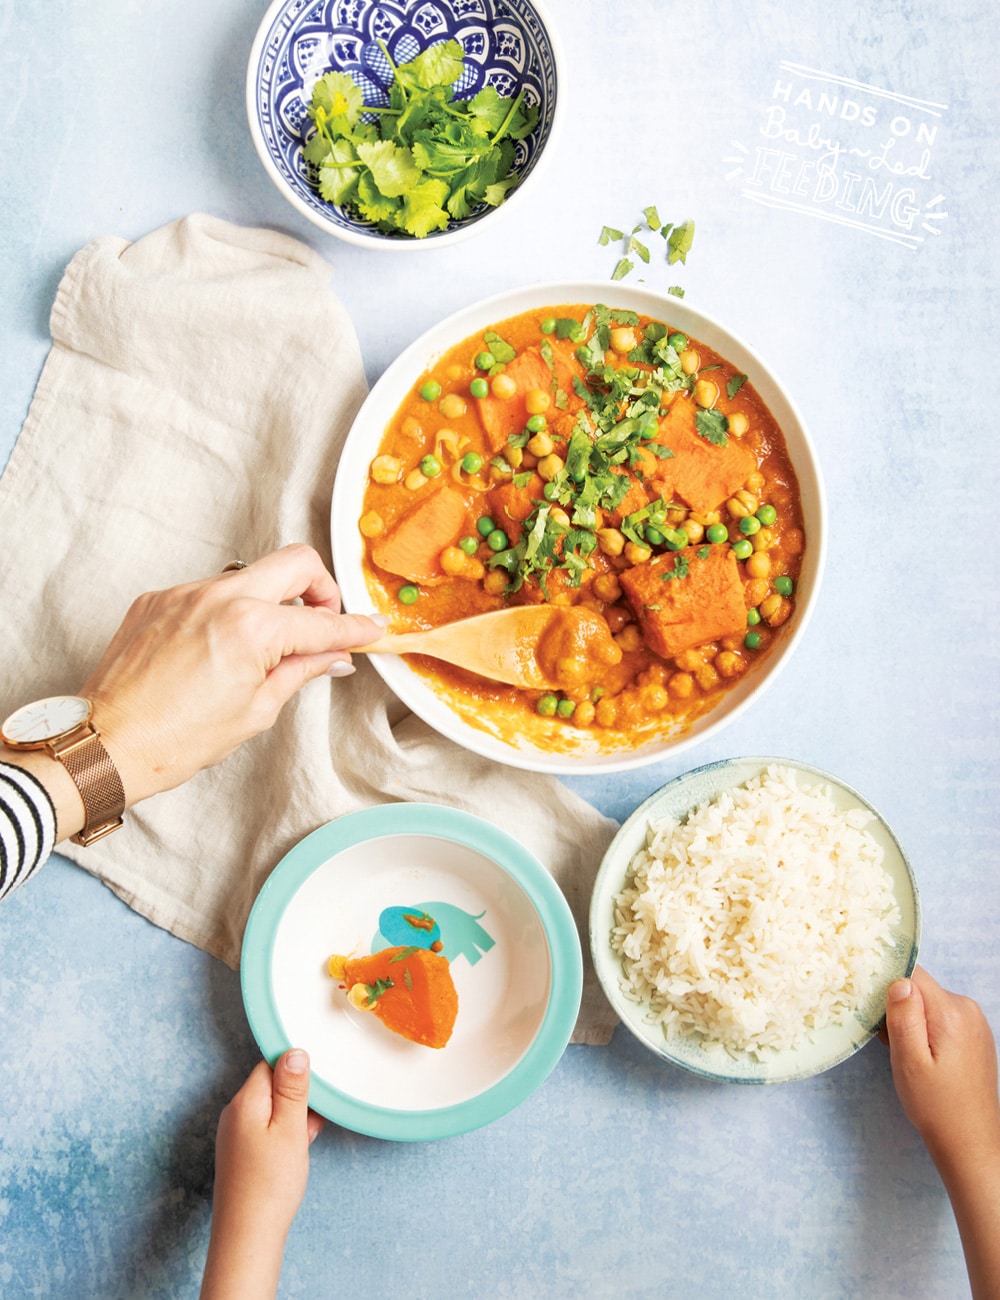 Baby Led Weaning Vegan Slow Cooker Chickpea & Sweet Potato Korma- Baby friendly recipe that is a healthy family dinner too! 4 hours in a crock-pot or 2 in the oven! #babyledweaning #VEGAN #slowcooker #DAIRYFREE #babyledfeeding